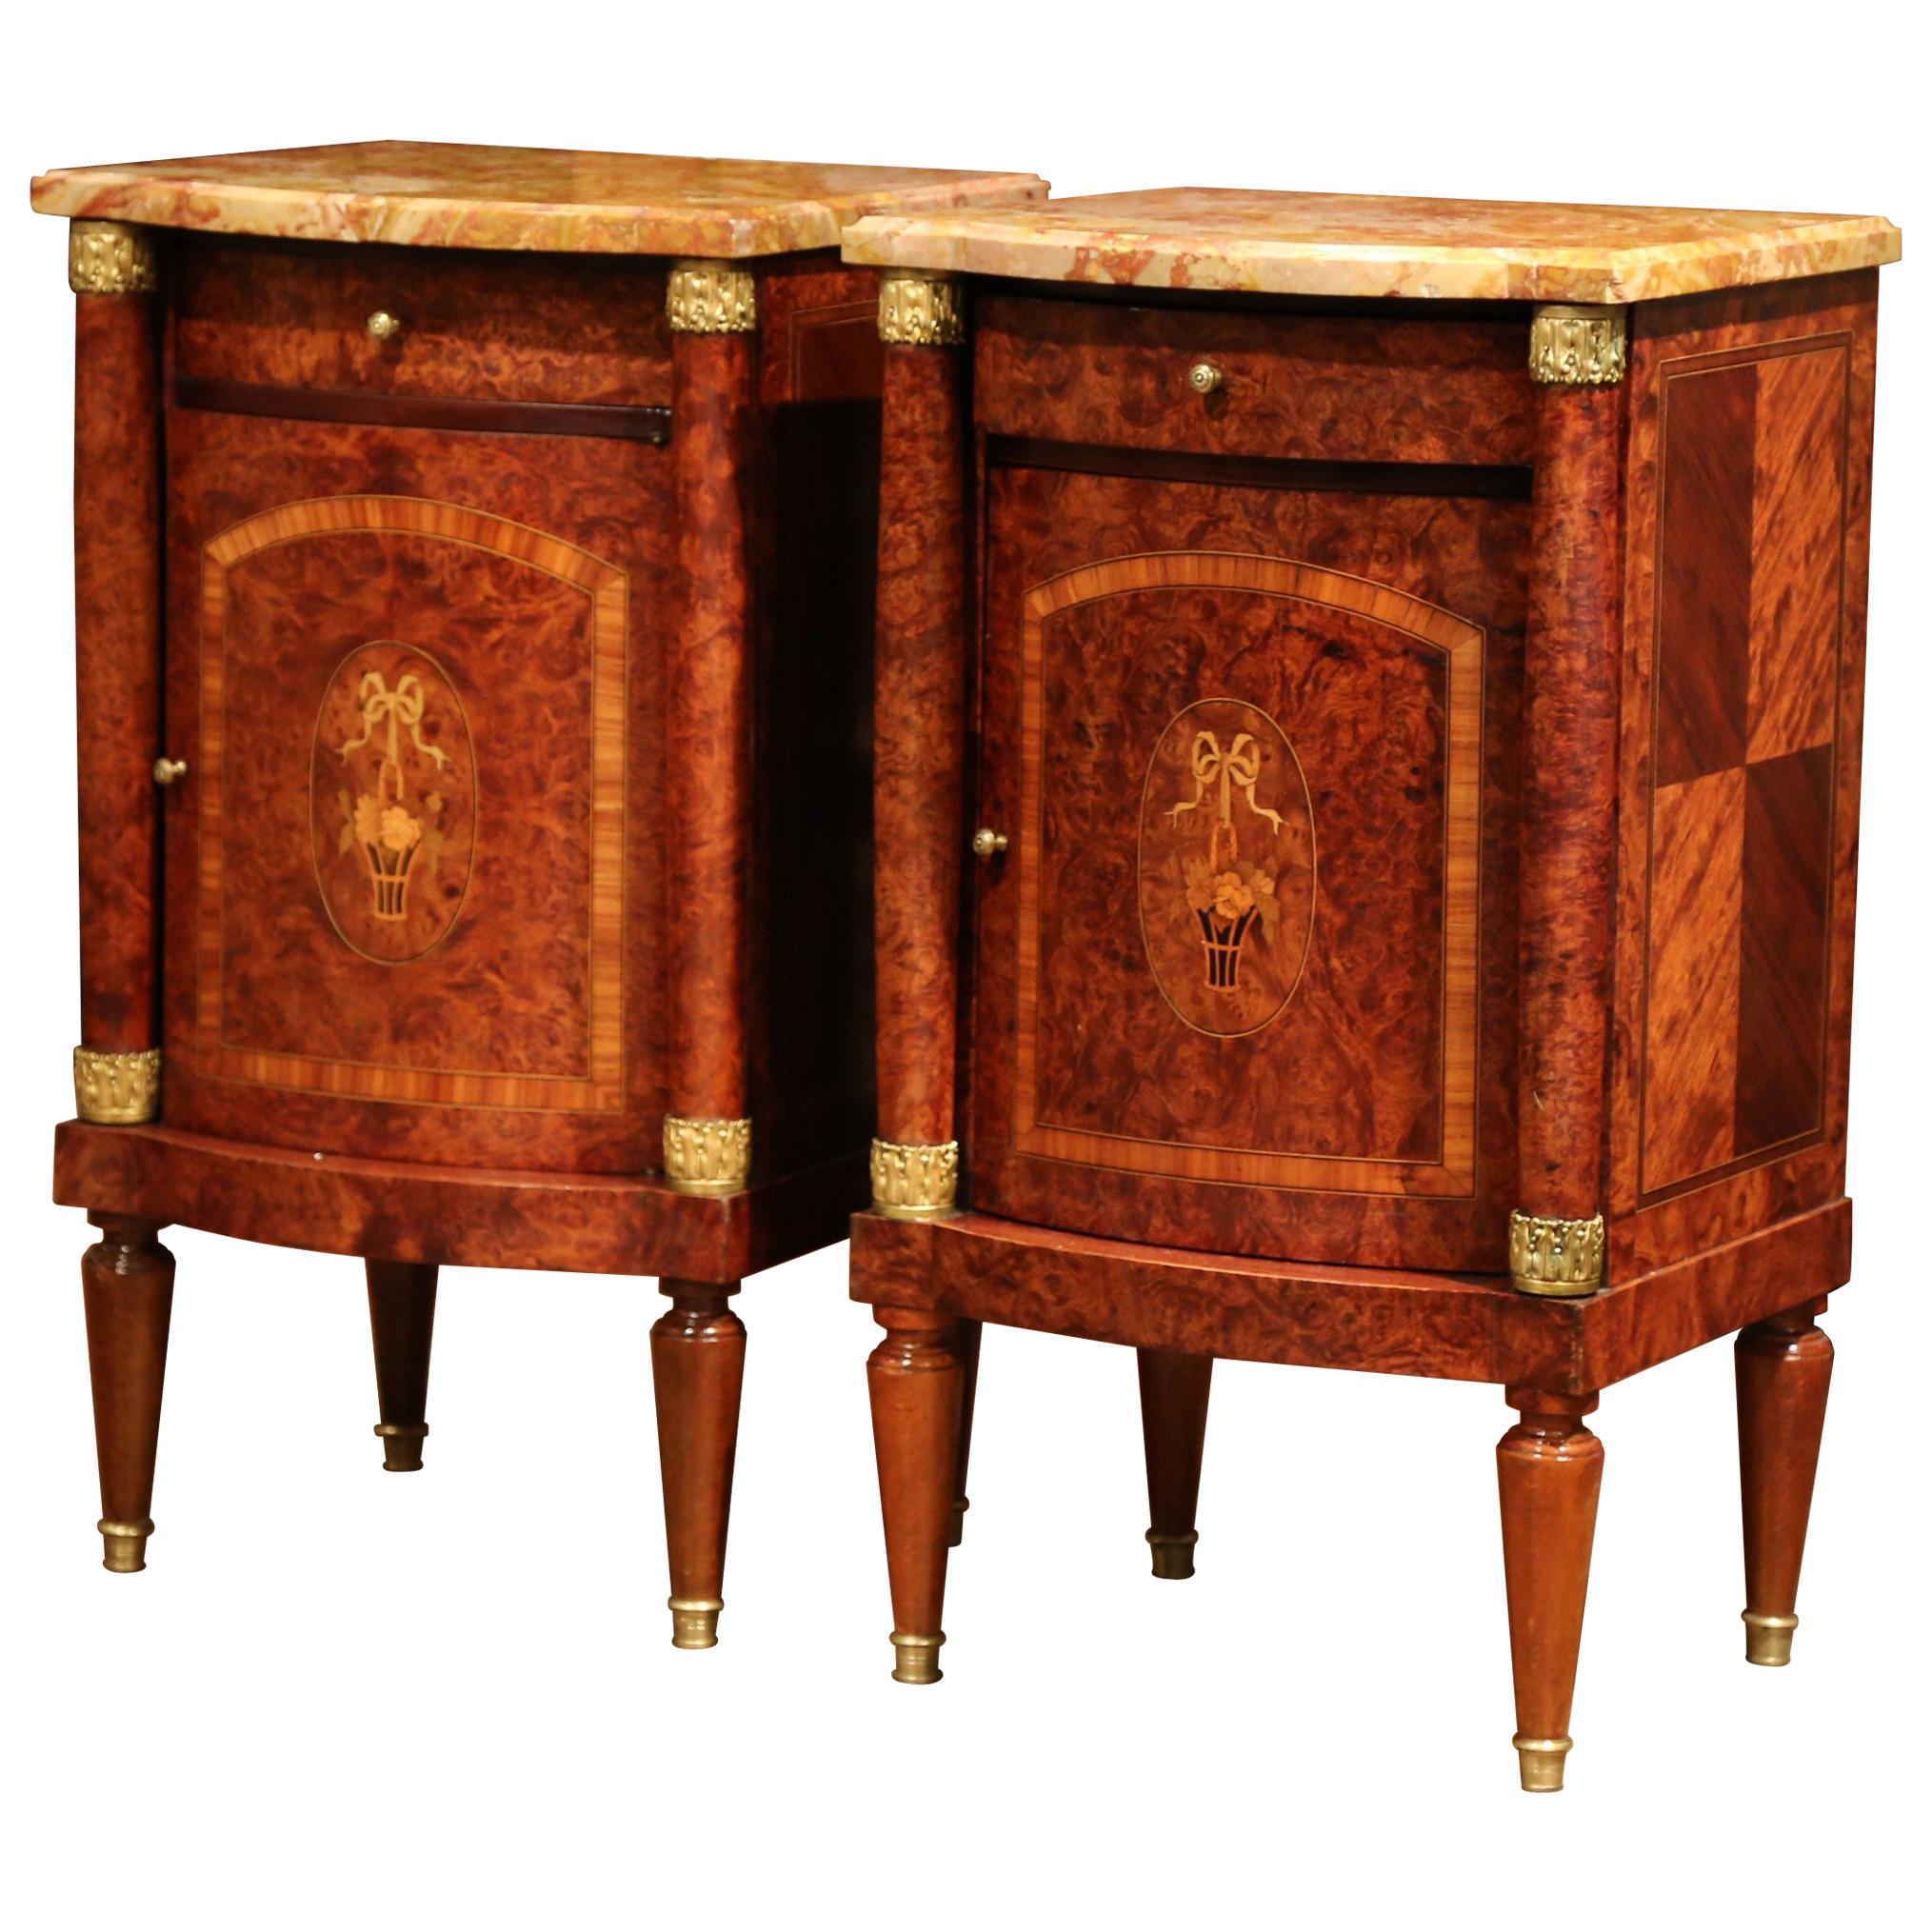 Pair of 19th Century Empire Bombe Burl Walnut Nightstands with Red Marble Top